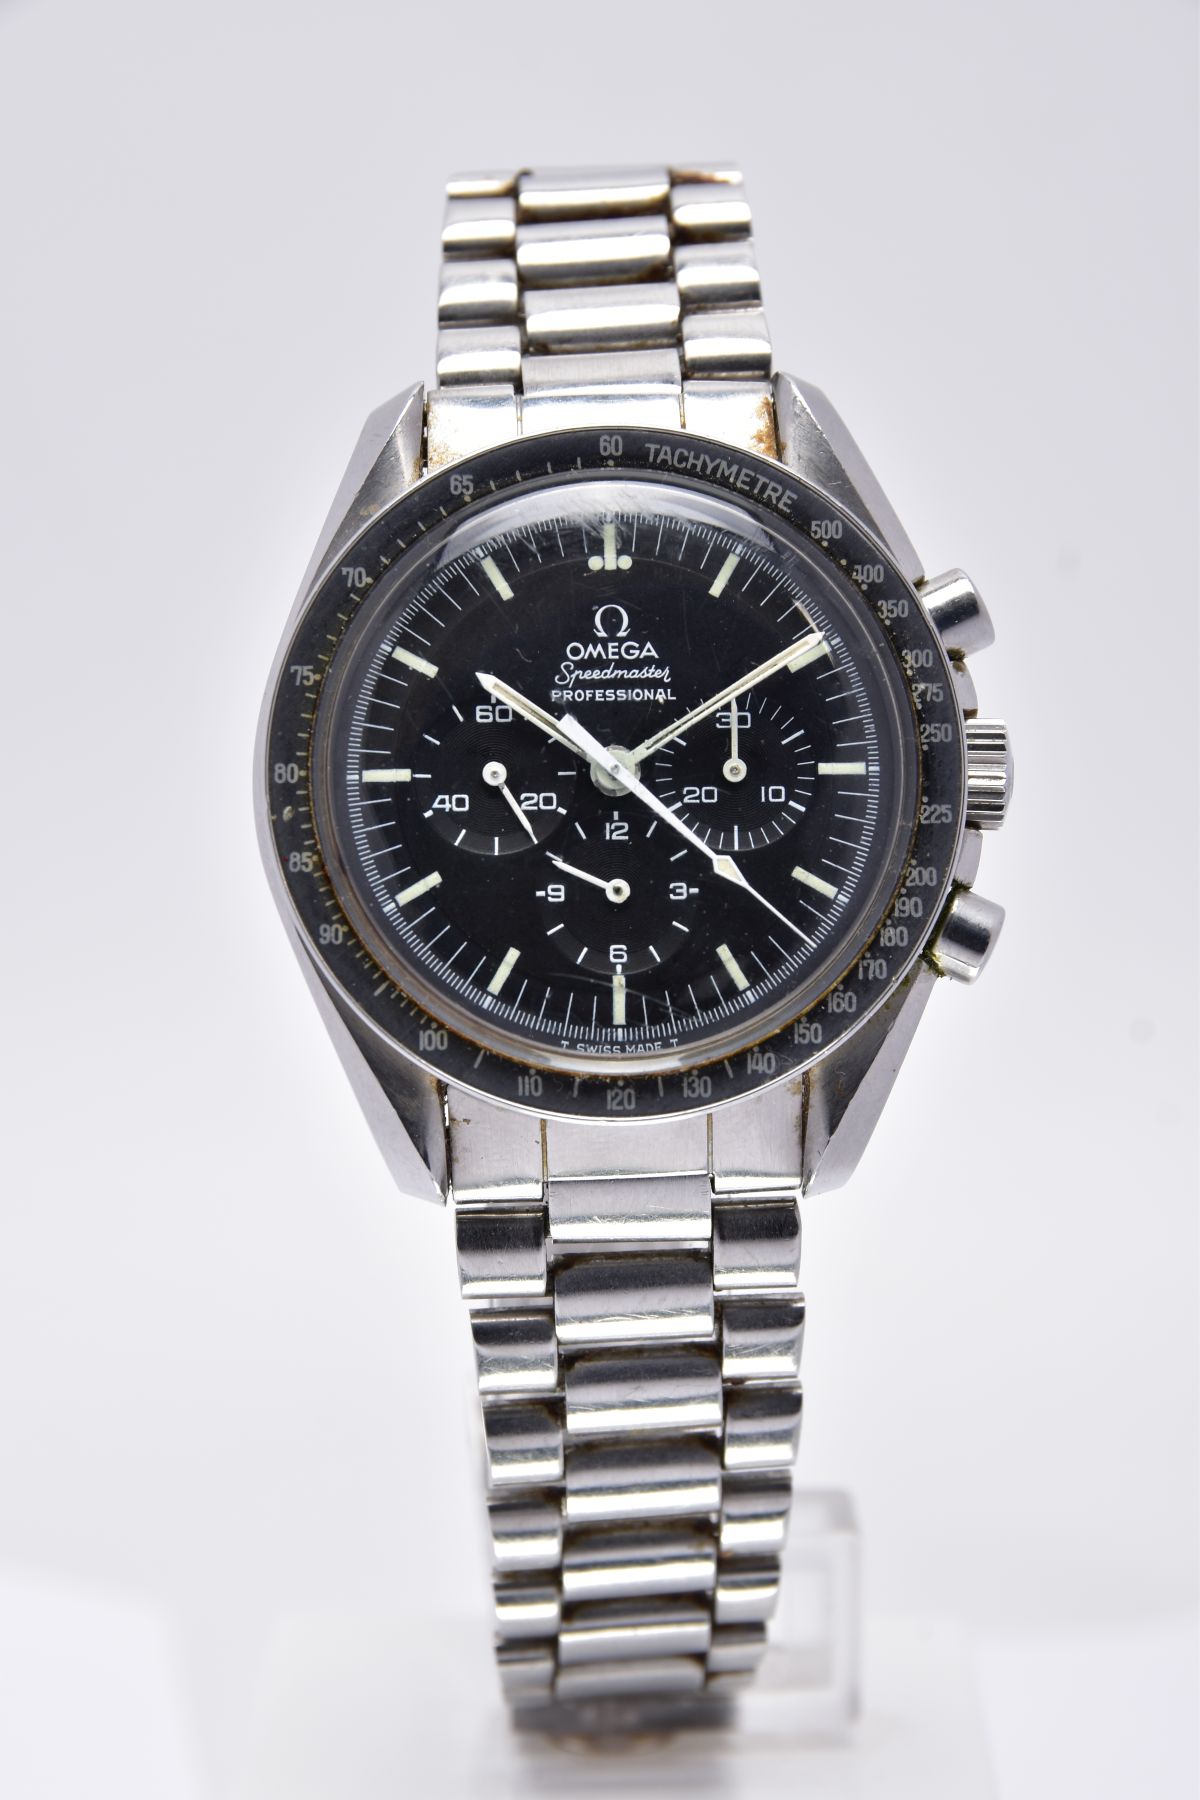 AN OMEGA SPEEDMASTER PROFESSIONAL MOONWATCH black dial with luminescent baton markers, black